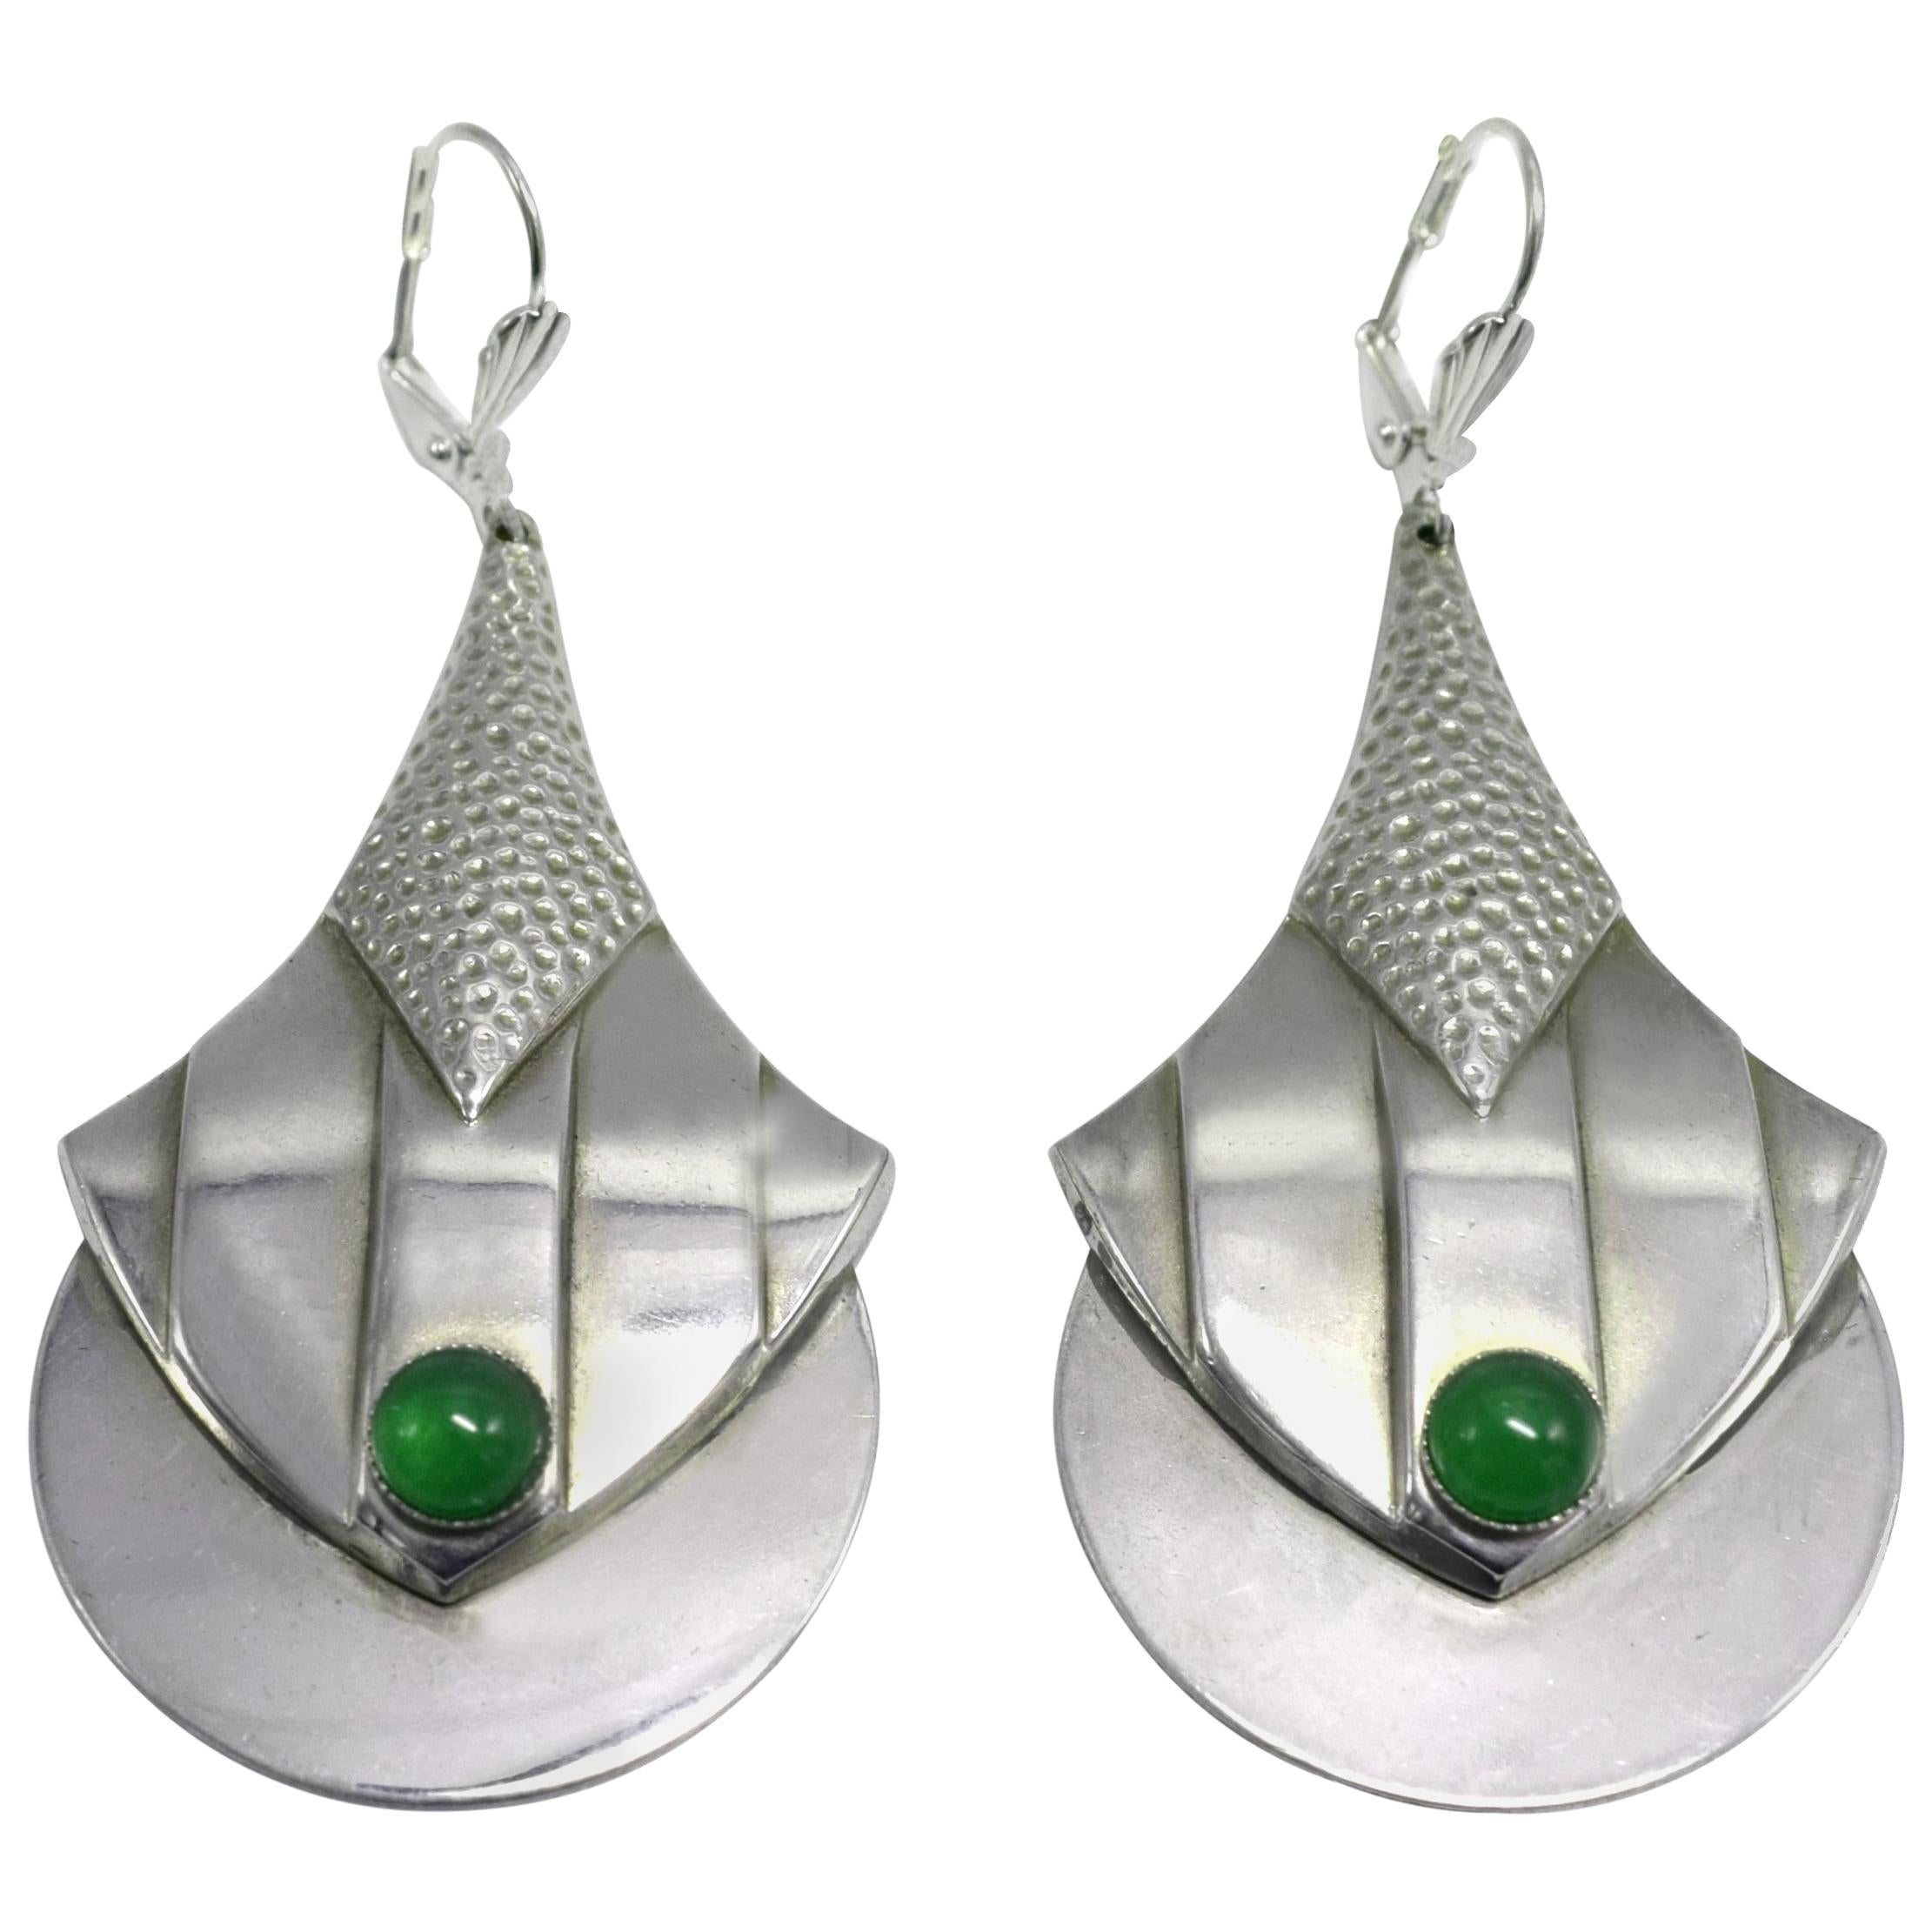 Art Deco Modernist Silver Plated and Green Glass Earrings, circa 1930